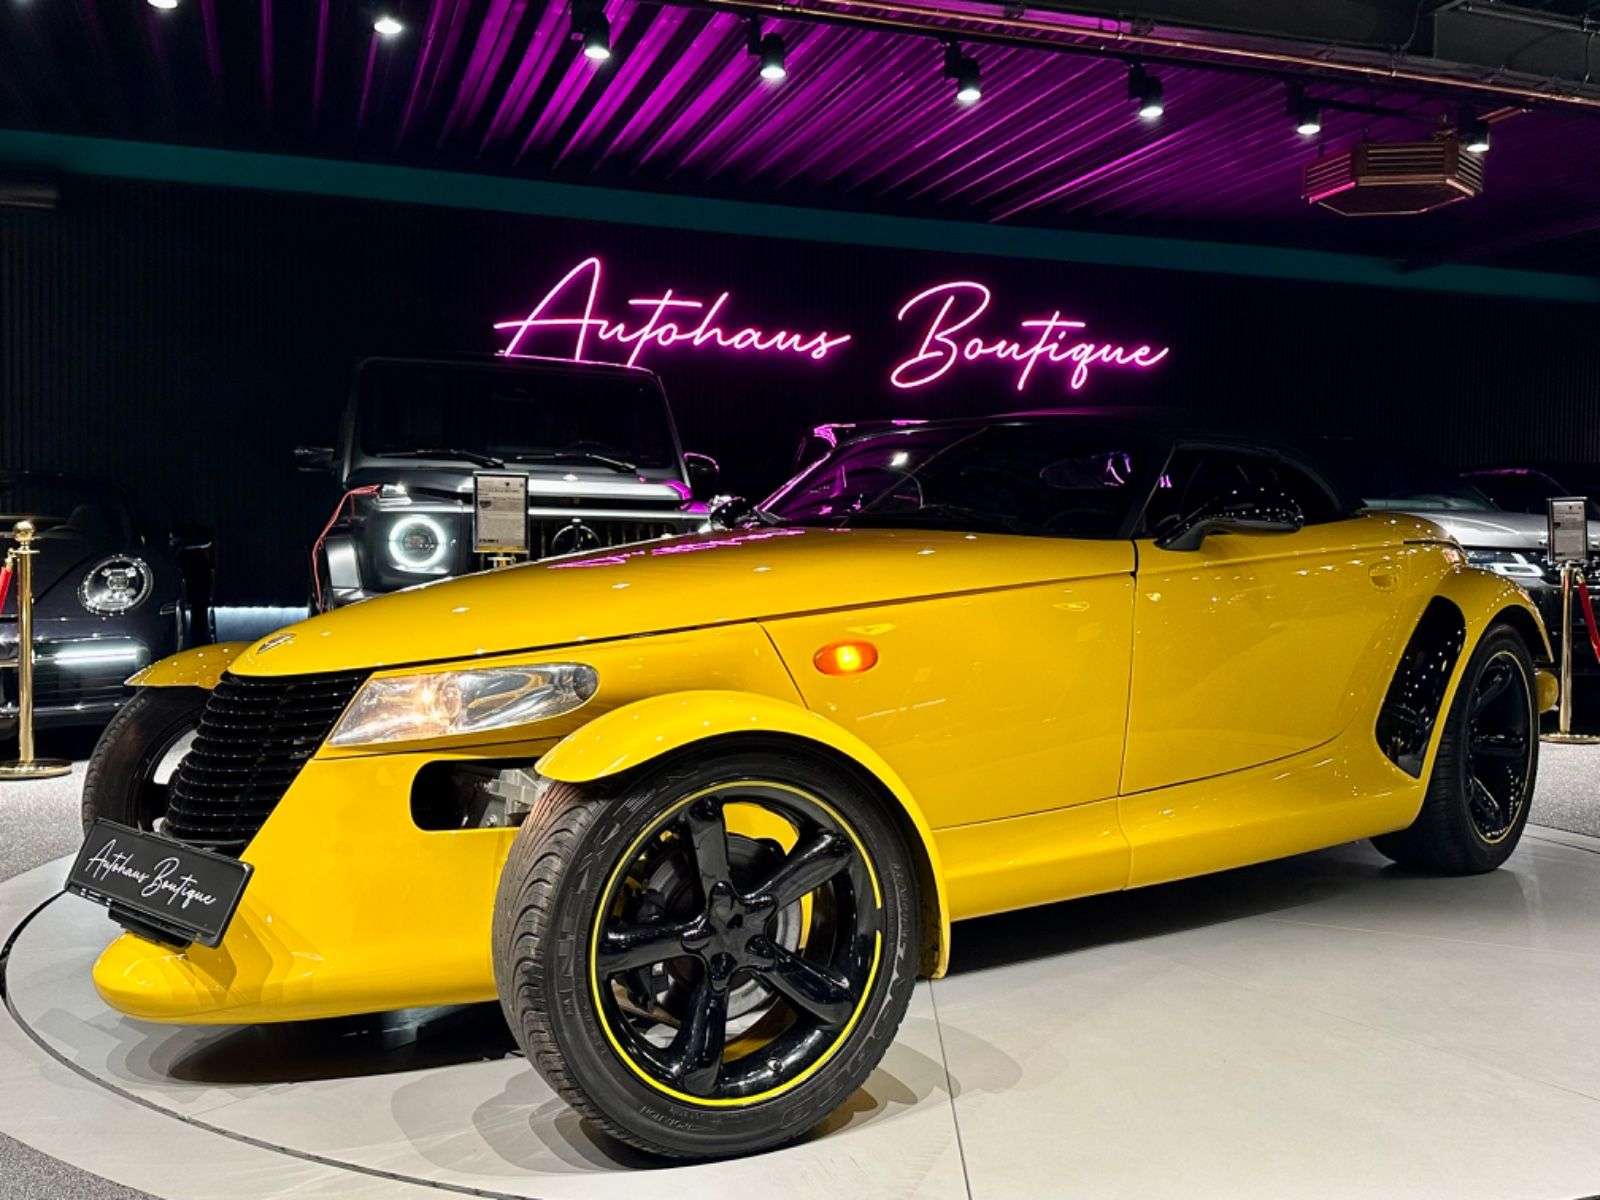 Plymouth Prowler Convertible in Yellow used in Berlin for € 45,980.-